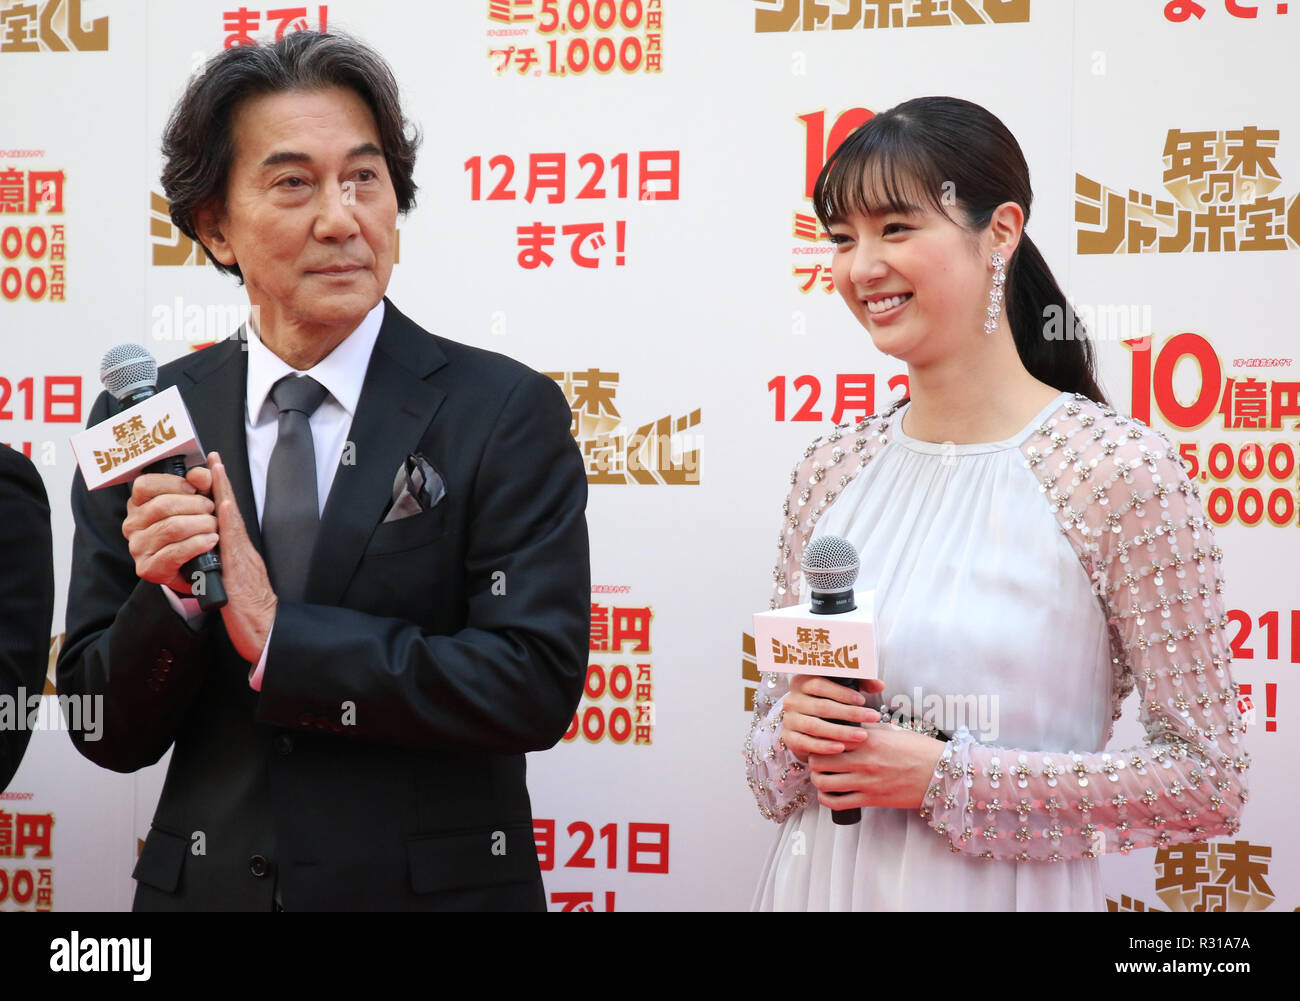 Tokyo, Japan. 21st Nov, 2018. Japanese actor koji Yakusho (L) and actress Ayu Shinkawa (R) attend a promotional event for the 1 billion yen "Year-end Jumbo lottery" as the first tickets go on sale in Tokyo on Wednesday, November 21, 2018. Thousands punters queued up for tickets in the hope of becoming a billionaire. Credit: Yoshio Tsunoda/AFLO/Alamy Live News Stock Photo